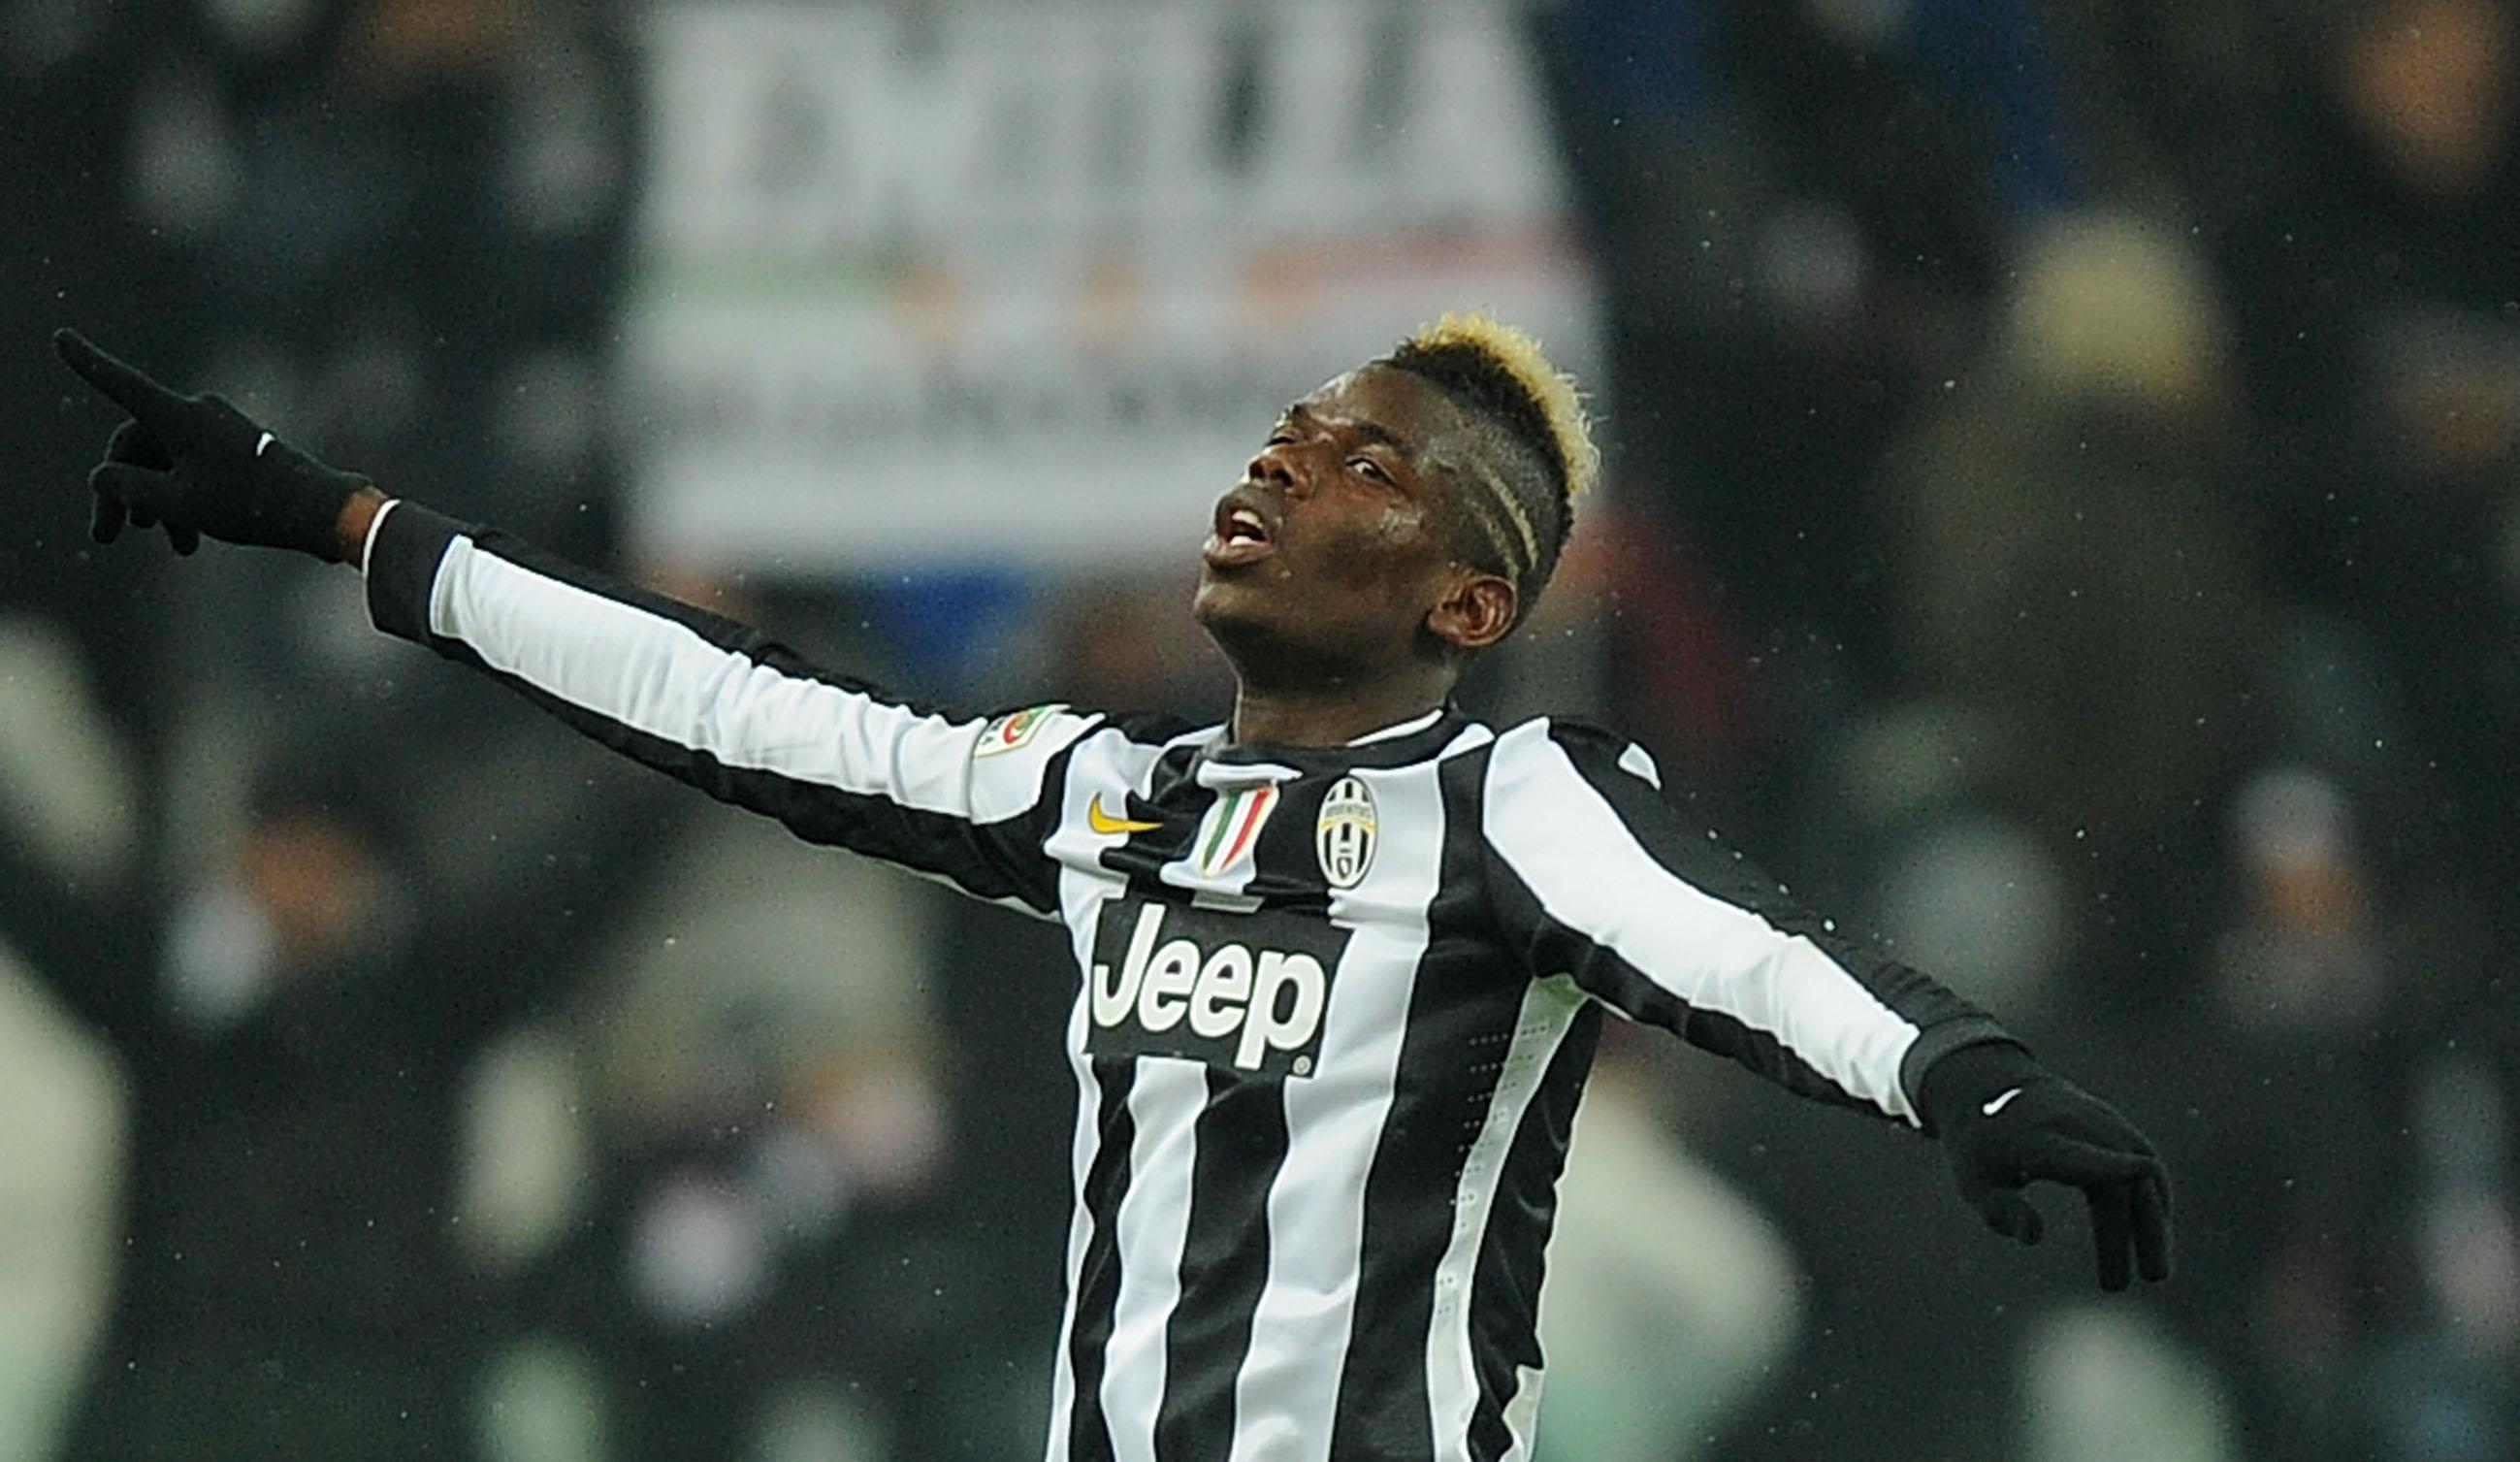 Video – On this day, Paul Pogba's header sealed Turin Derby - 